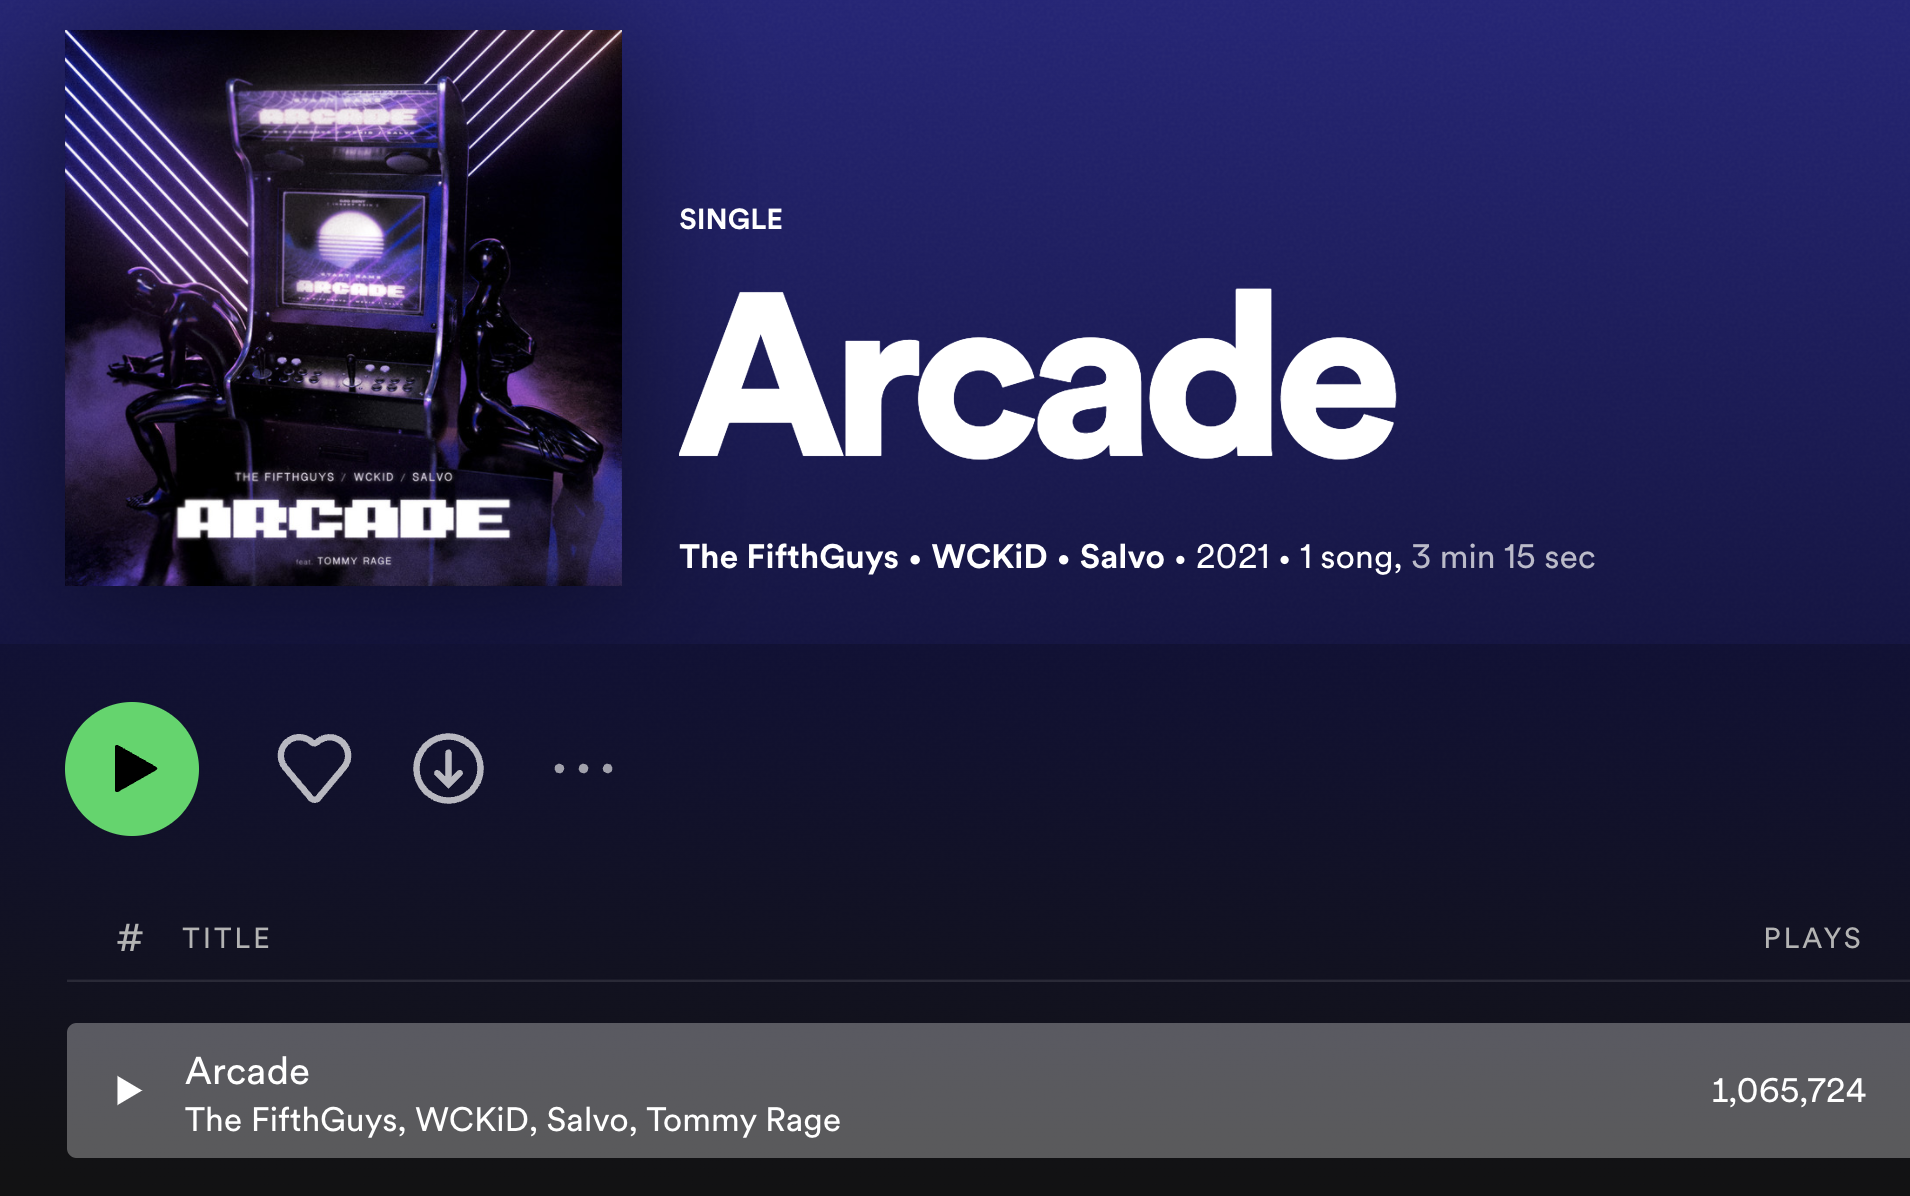 Arcade by the Fifthguys has both primary artists and featured artists listed on the track